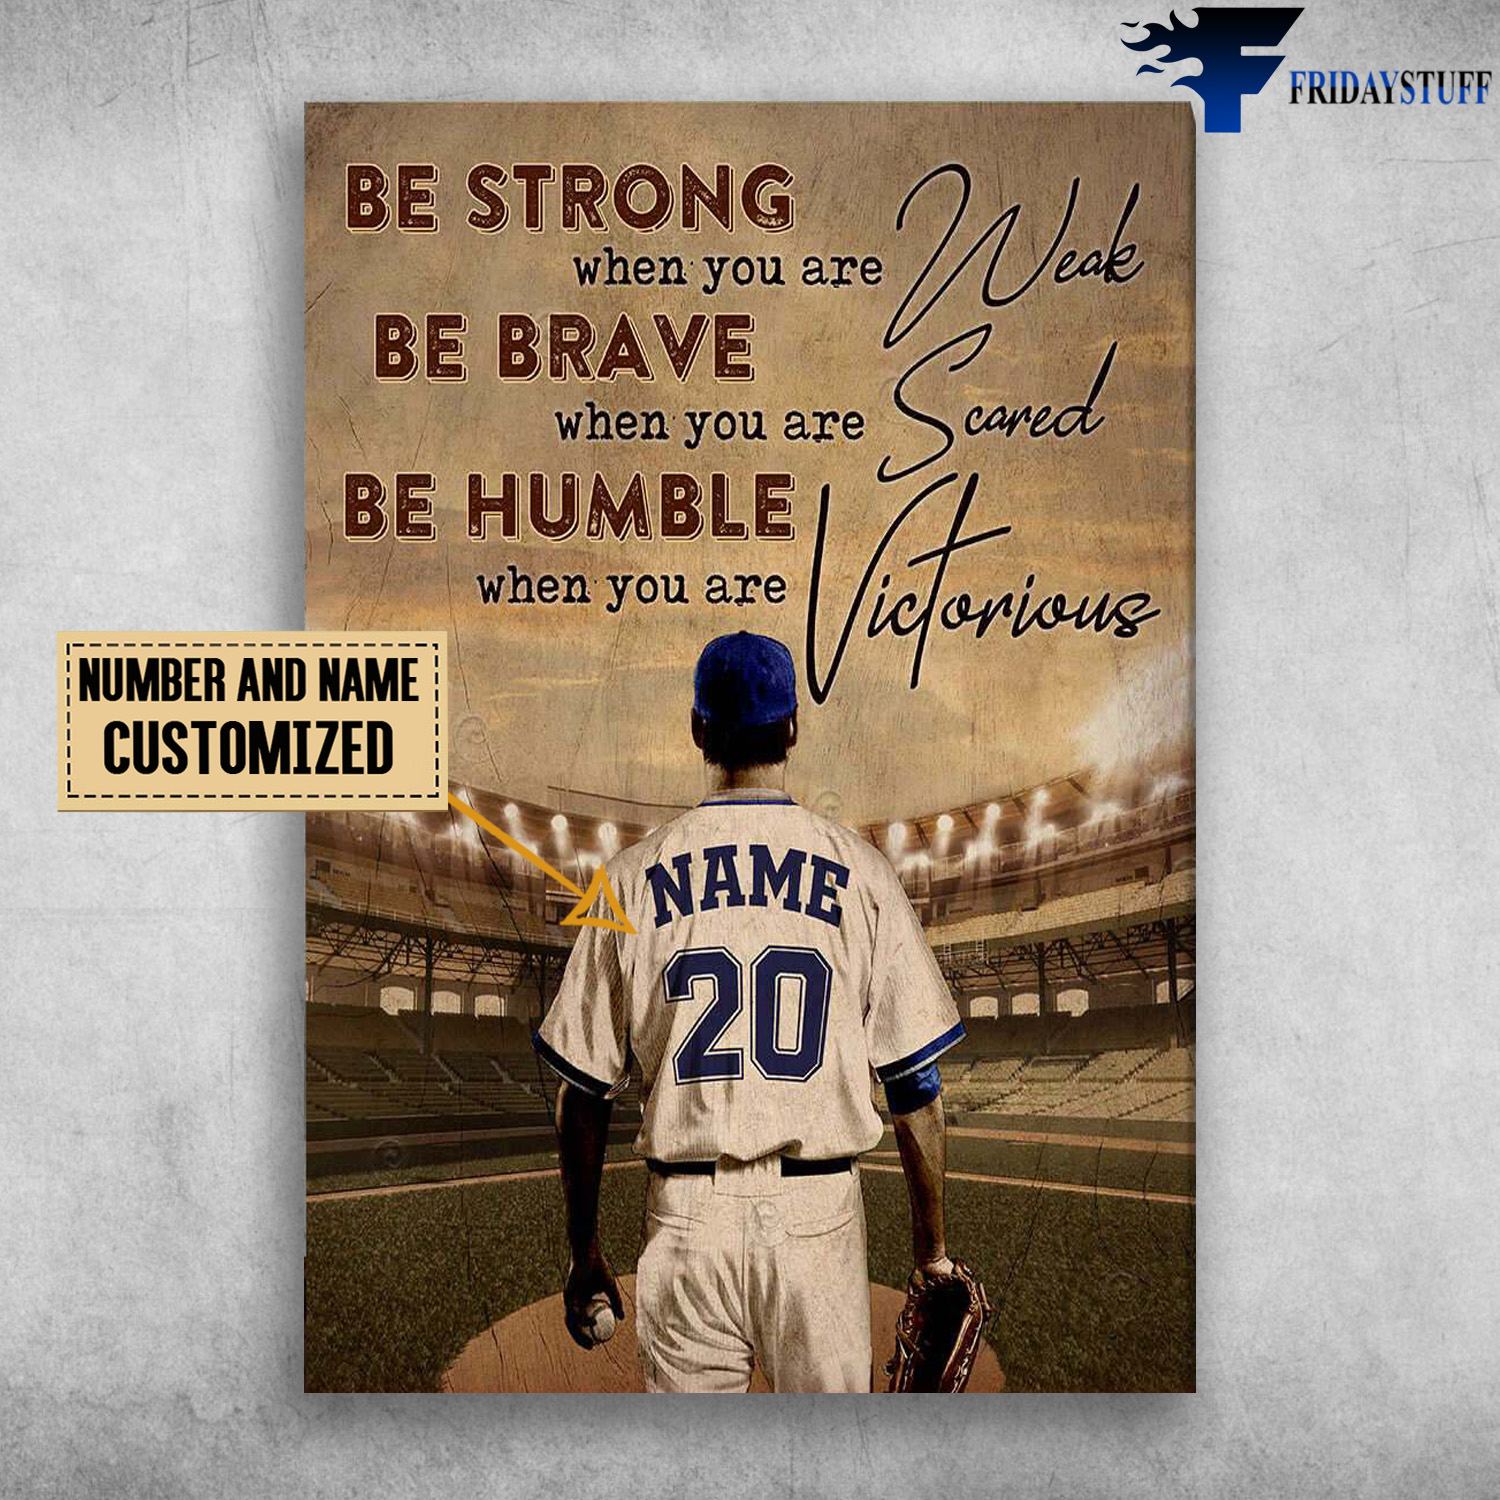 Baseball Player, Be Strong When You Are Weak, Be Brave When You Are Scared, Be Humble When You Are Victorious